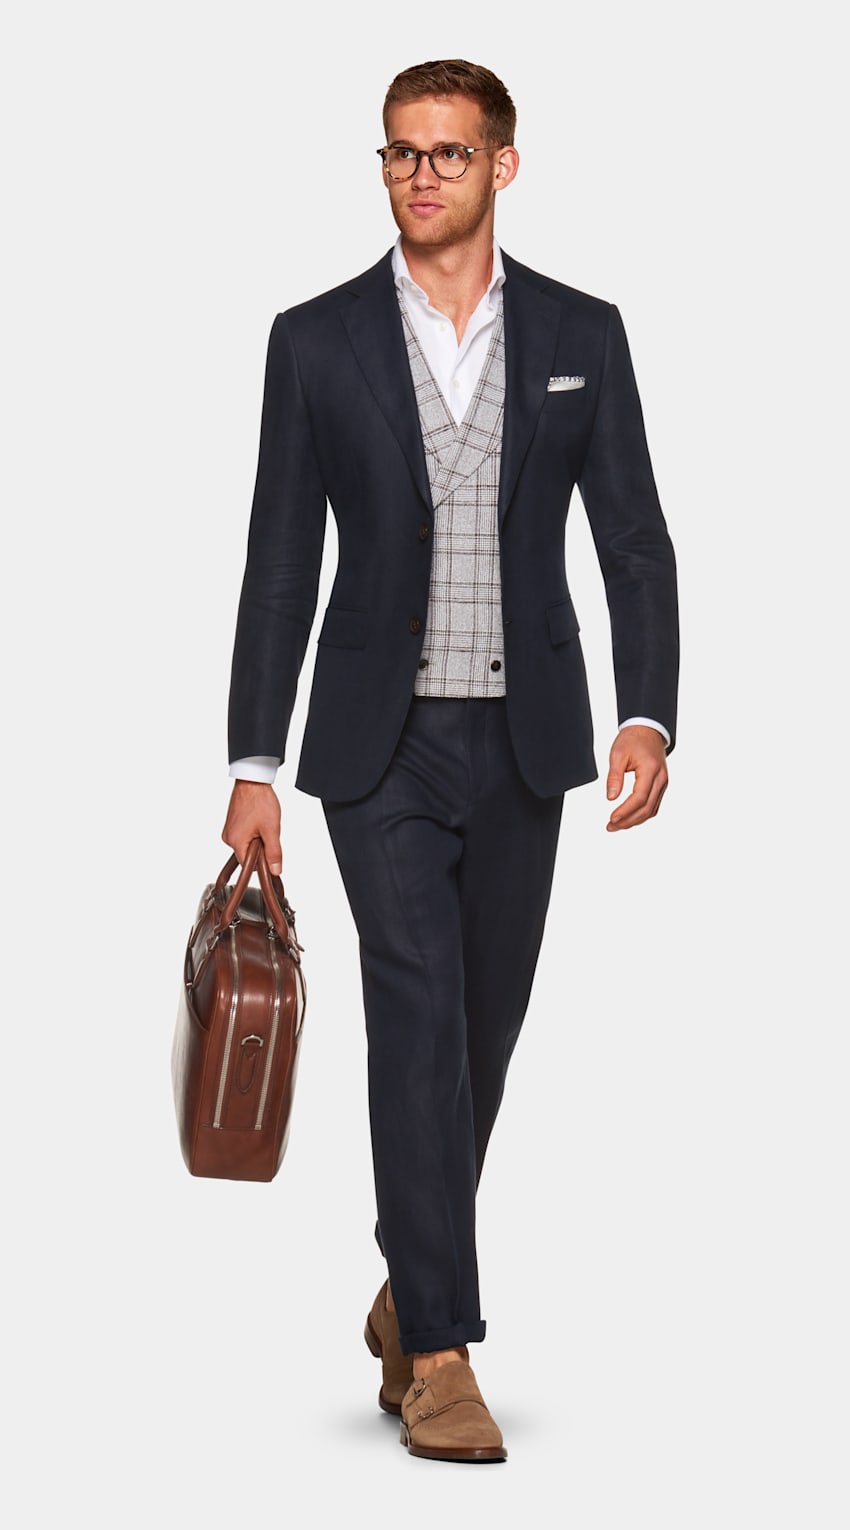 SUITSUPPLY  by Baird McNutt, Iran Napoli Navy Suit